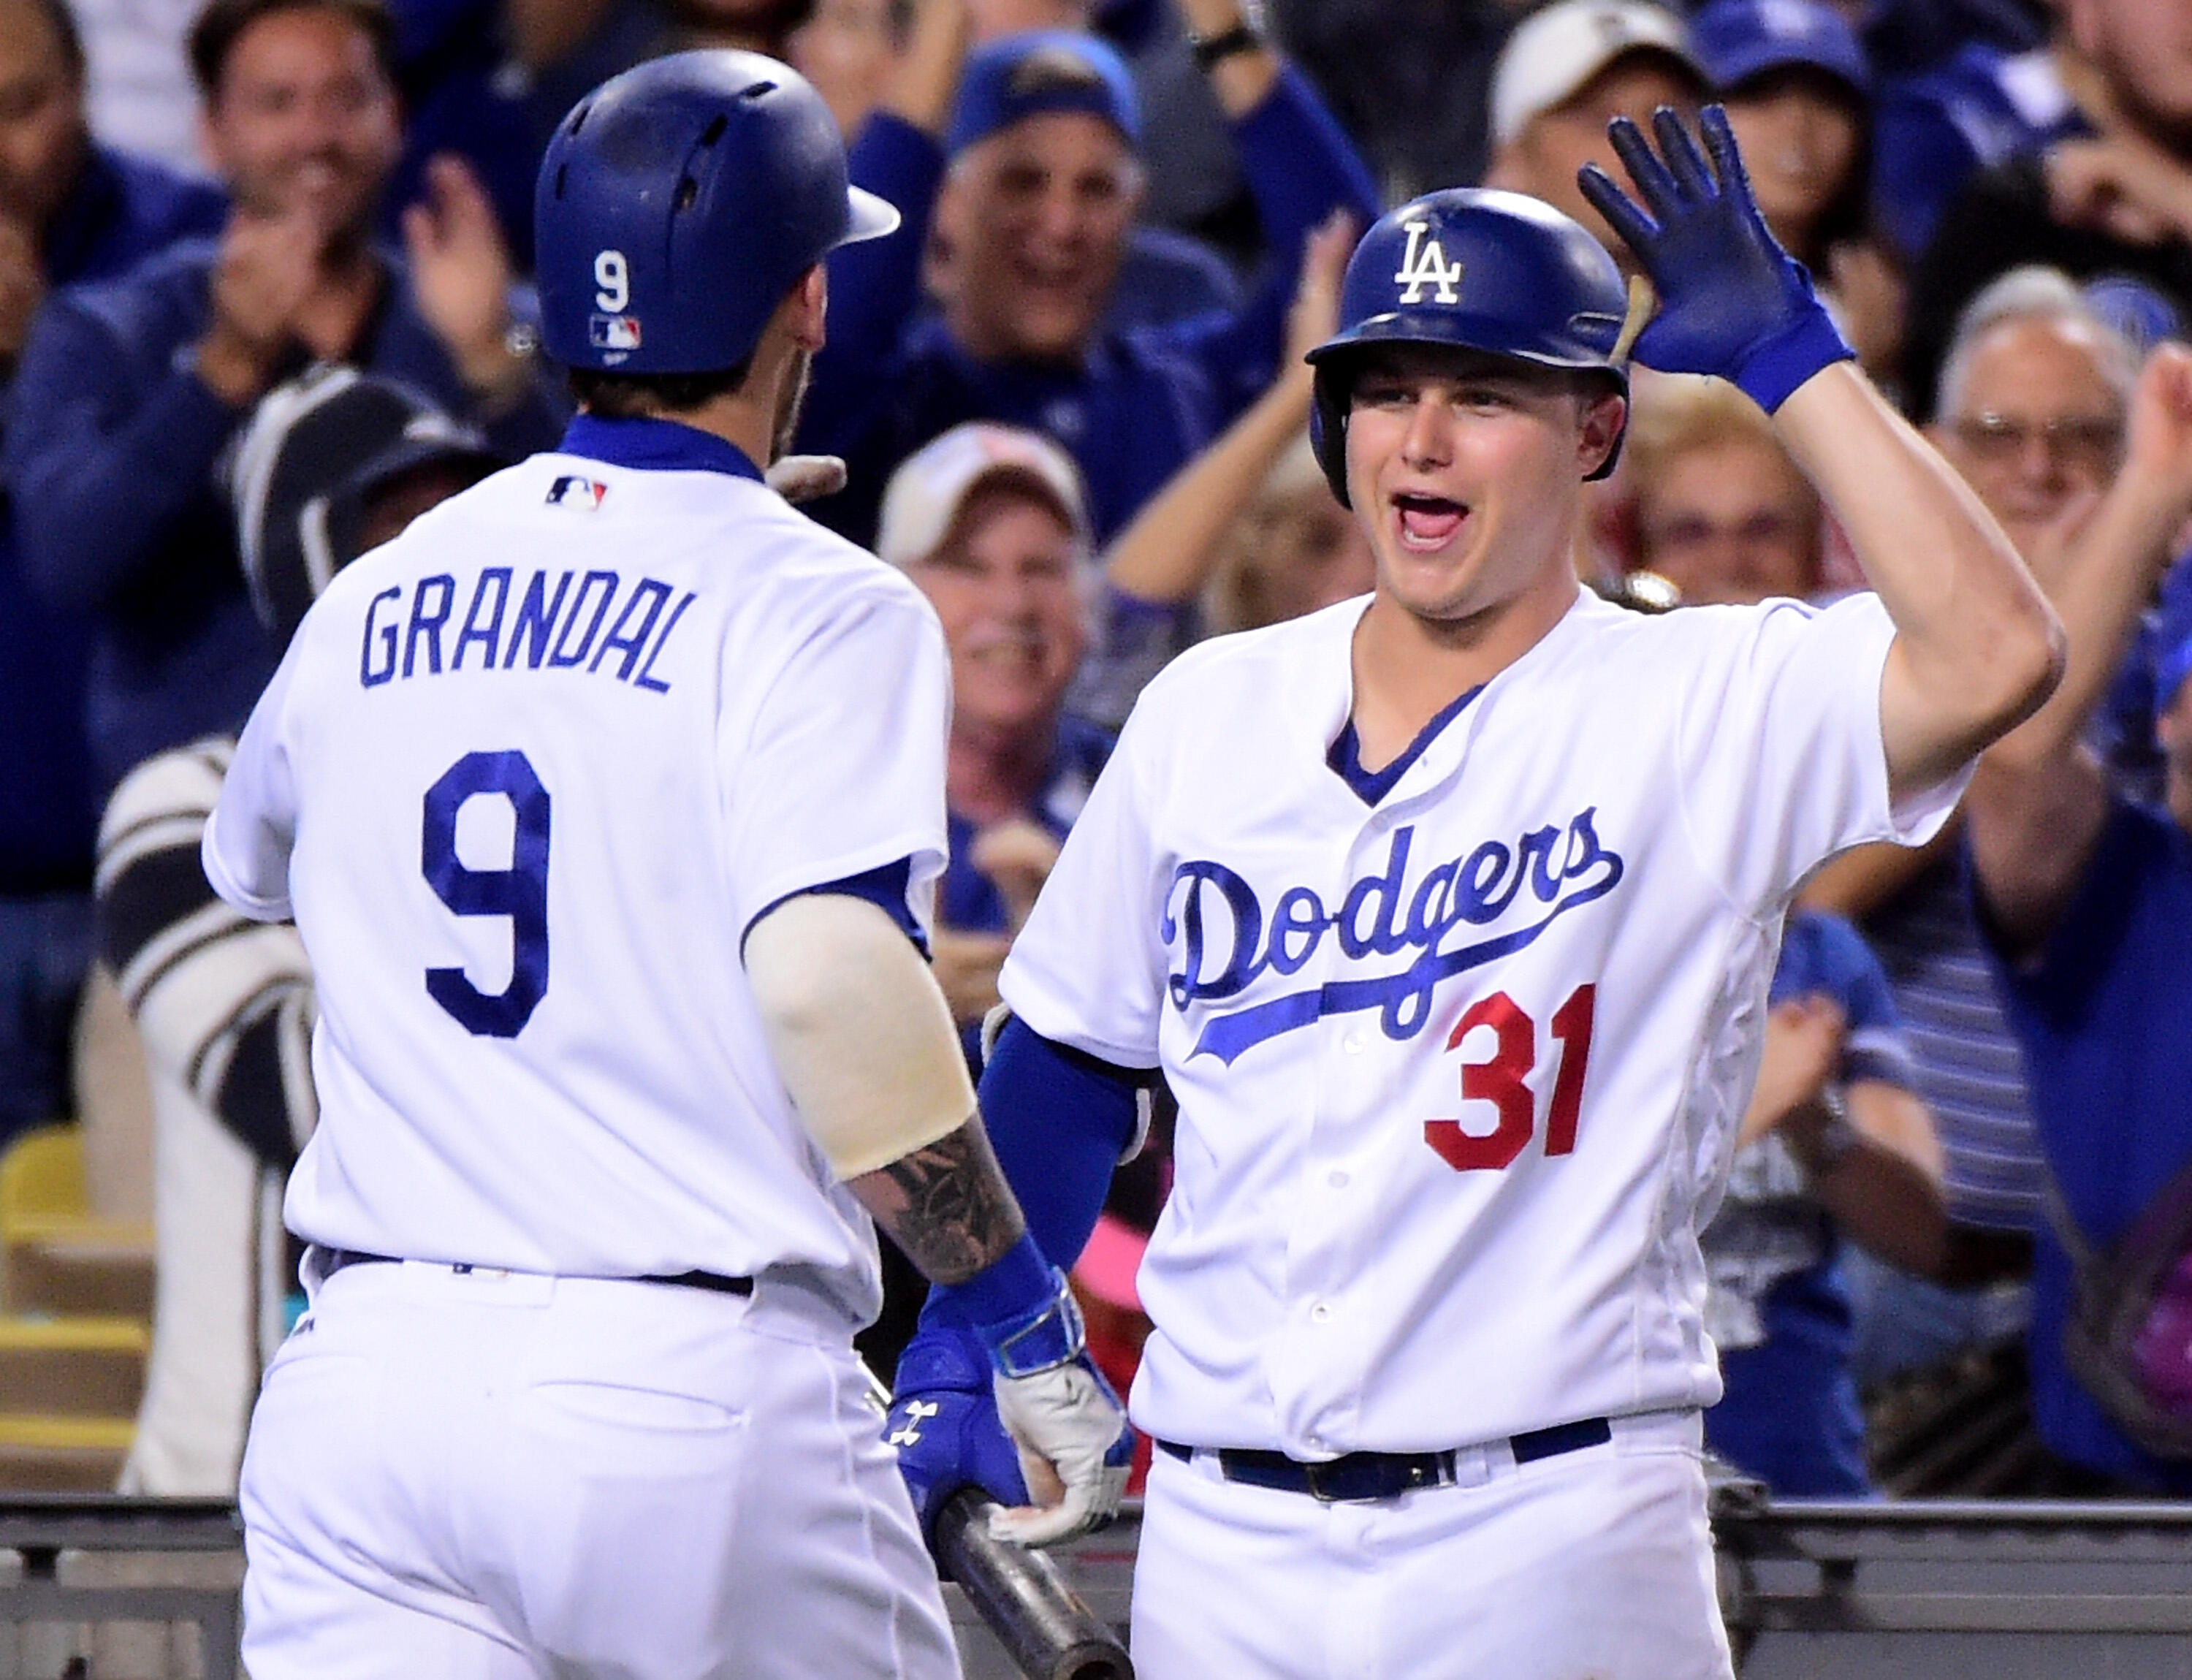 LOS ANGELES, CA - SEPTEMBER 22:  Joc Pederson #31 of the Los Angeles Dodgers reacts to a grand slam homerun from Yasmani Grandal #9 of the Los Angeles Dodgers to take a 7-4 lead over the Colorado Rockies during the seventh inning at Dodger Stadium on Sept